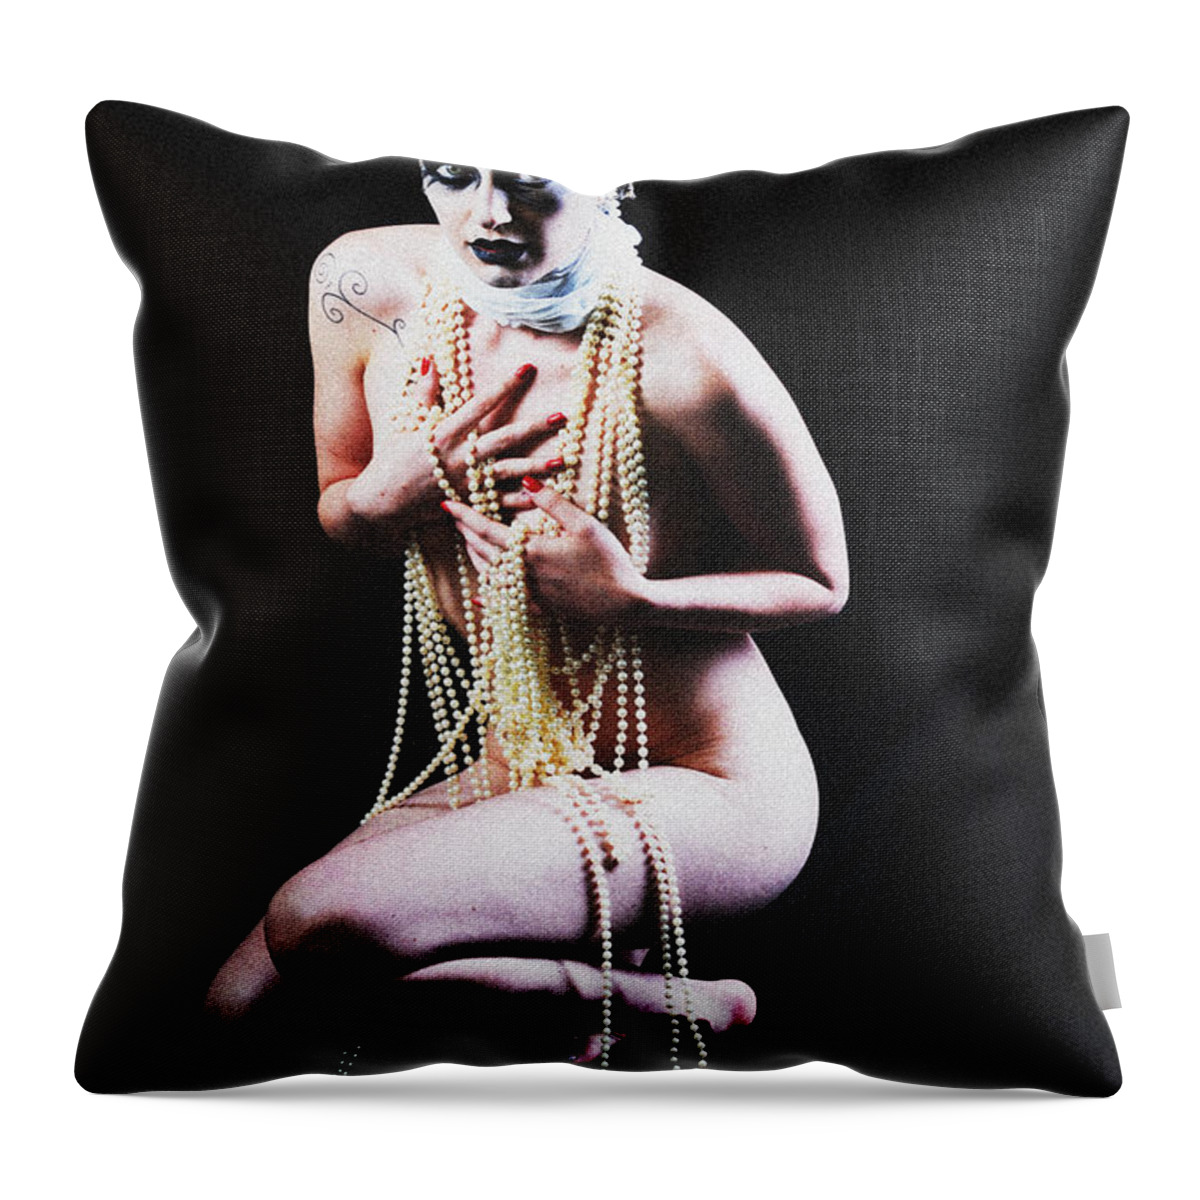 Fetish Photographs Throw Pillow featuring the photograph Caught Red Handed by Robert WK Clark